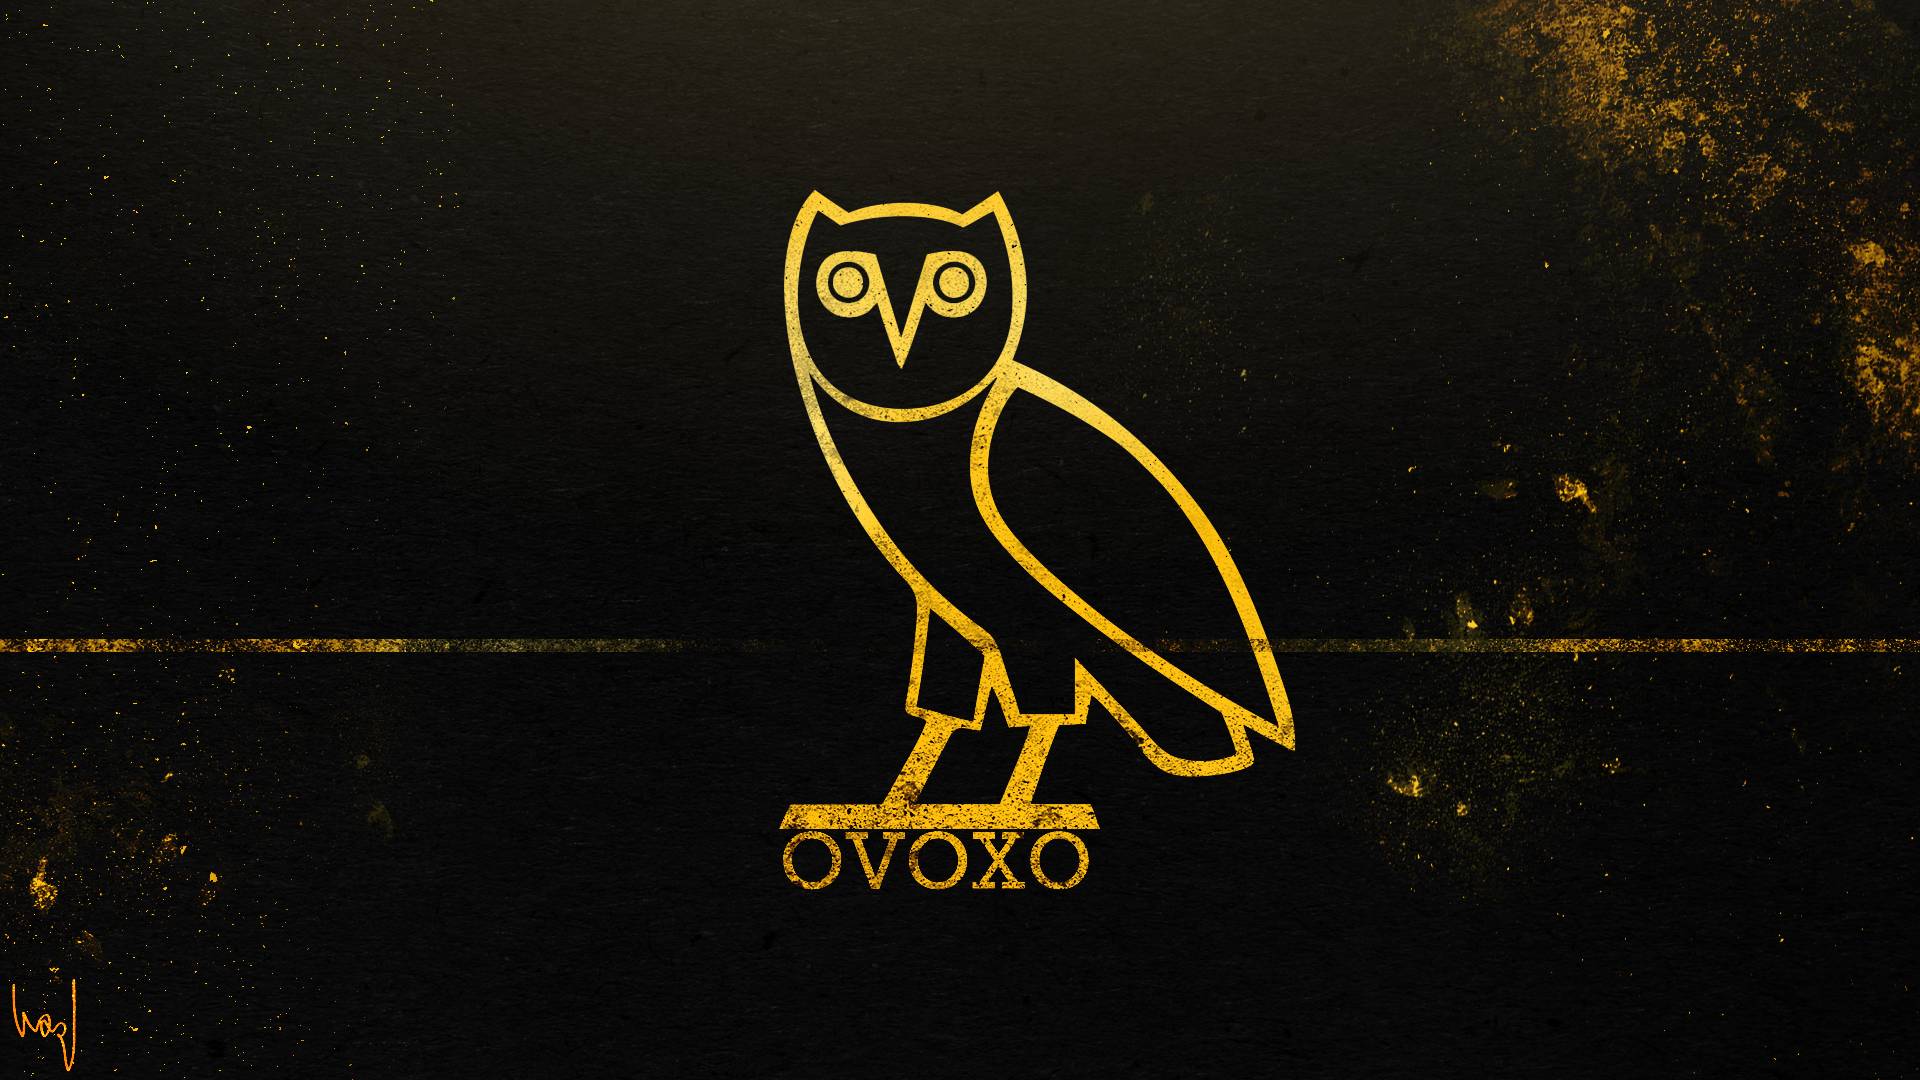 Gallery For gt Drake Ovoxo Wallpaper Hd